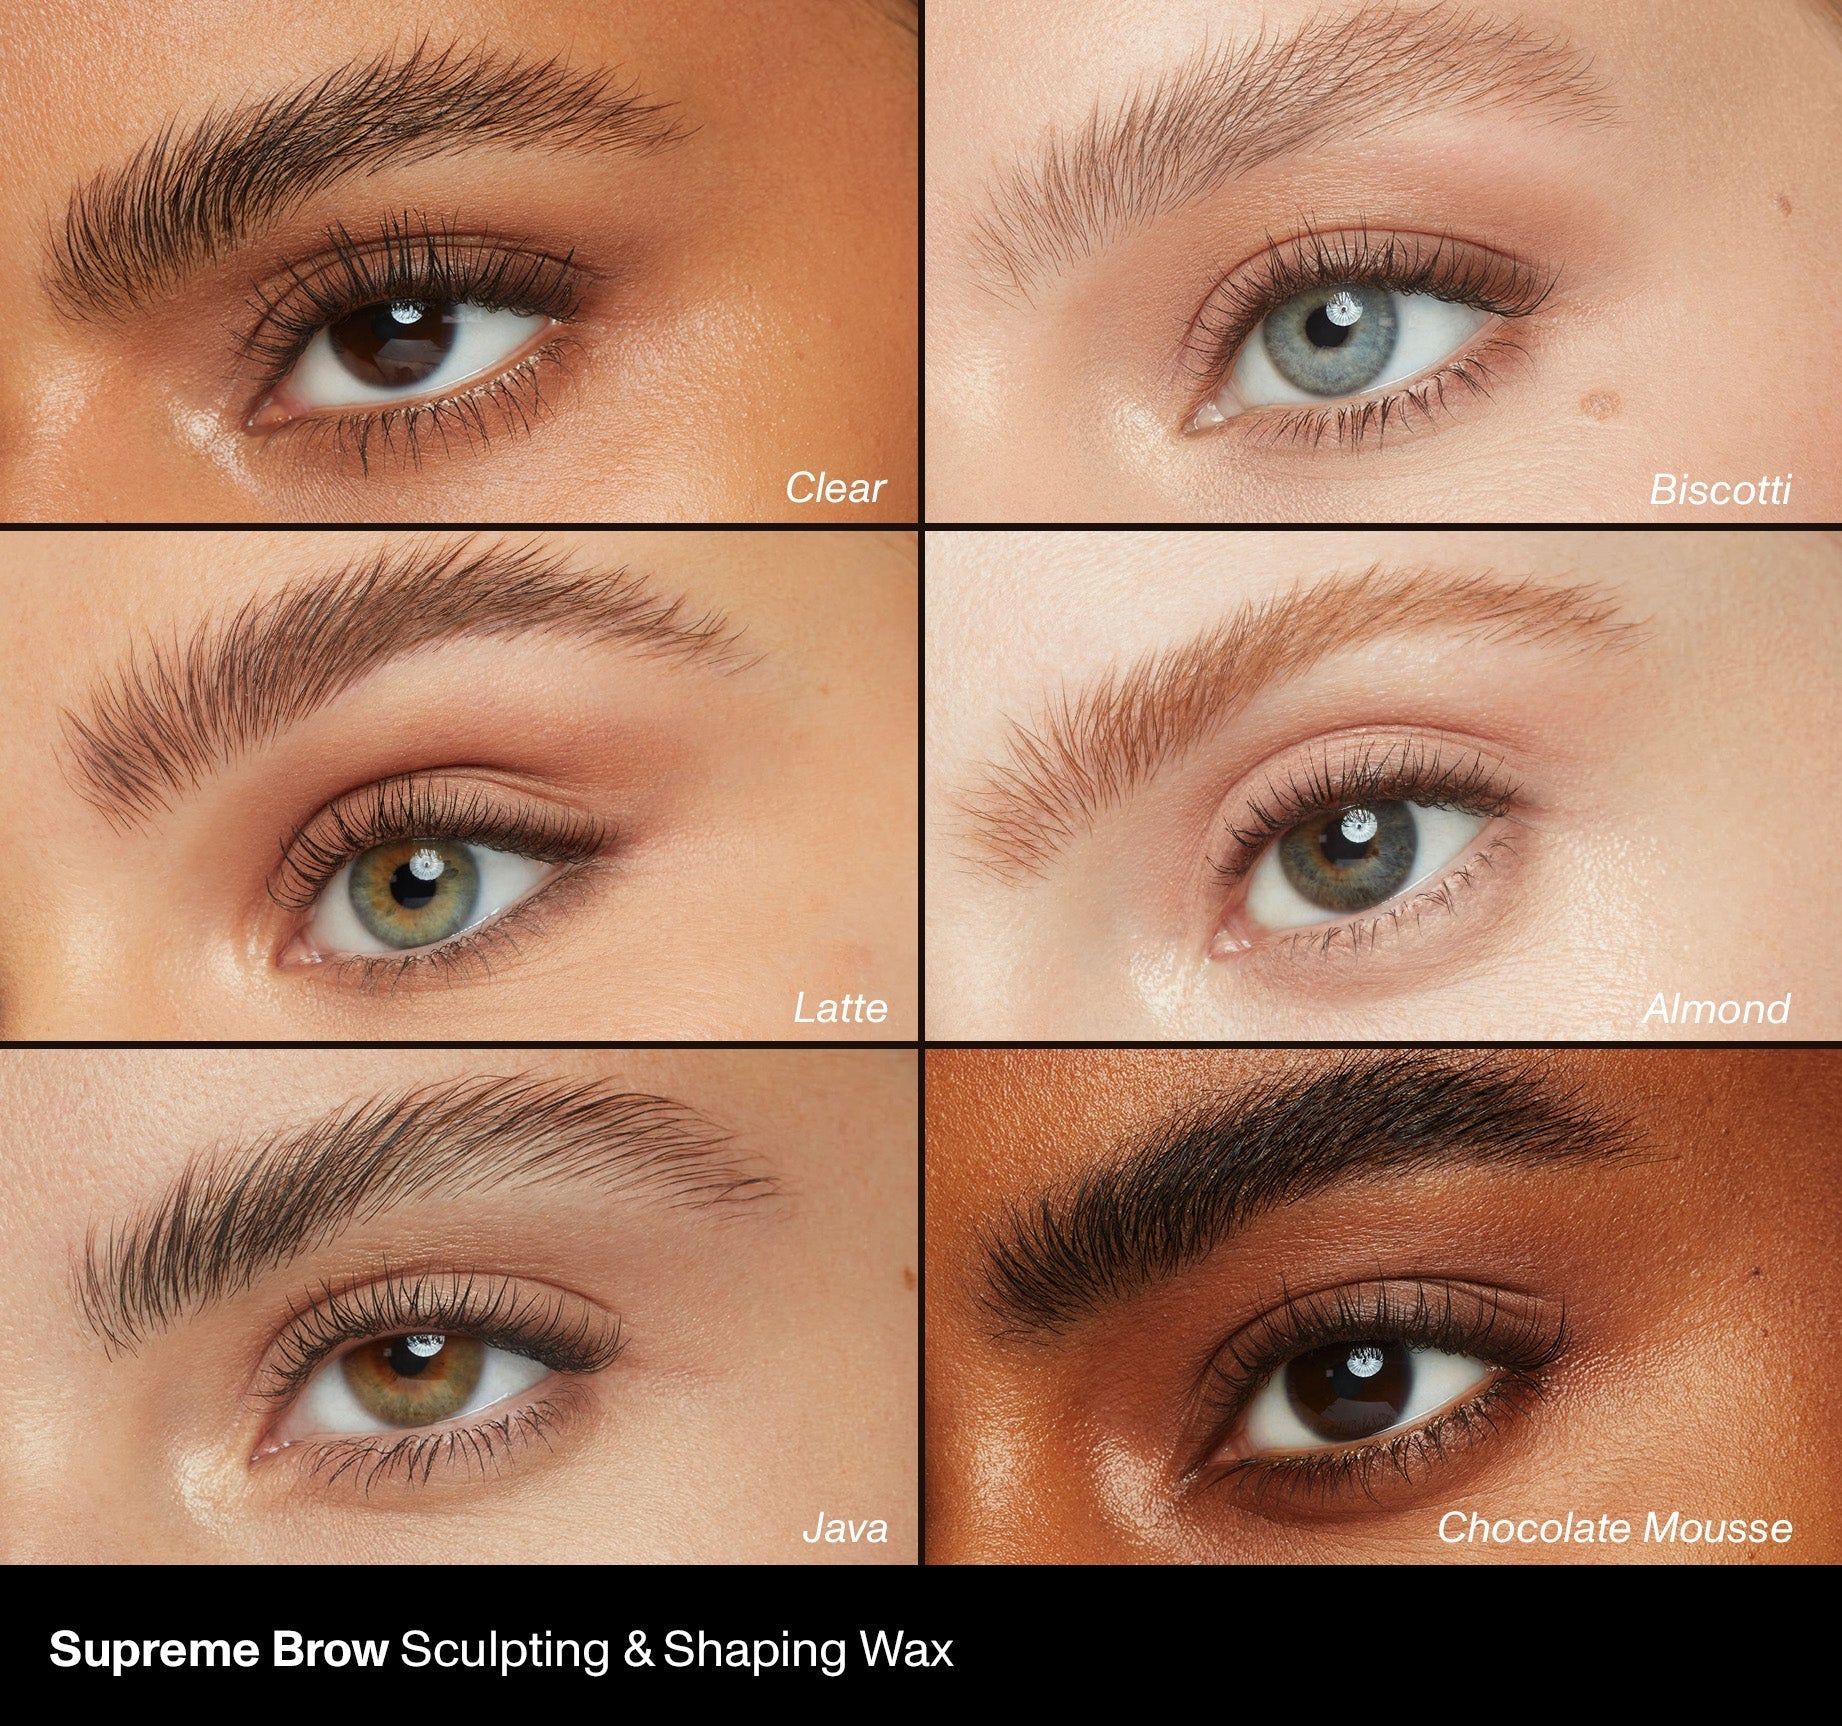 Supreme Brow Sculpting and Shaping Wax - Clear - Image 3